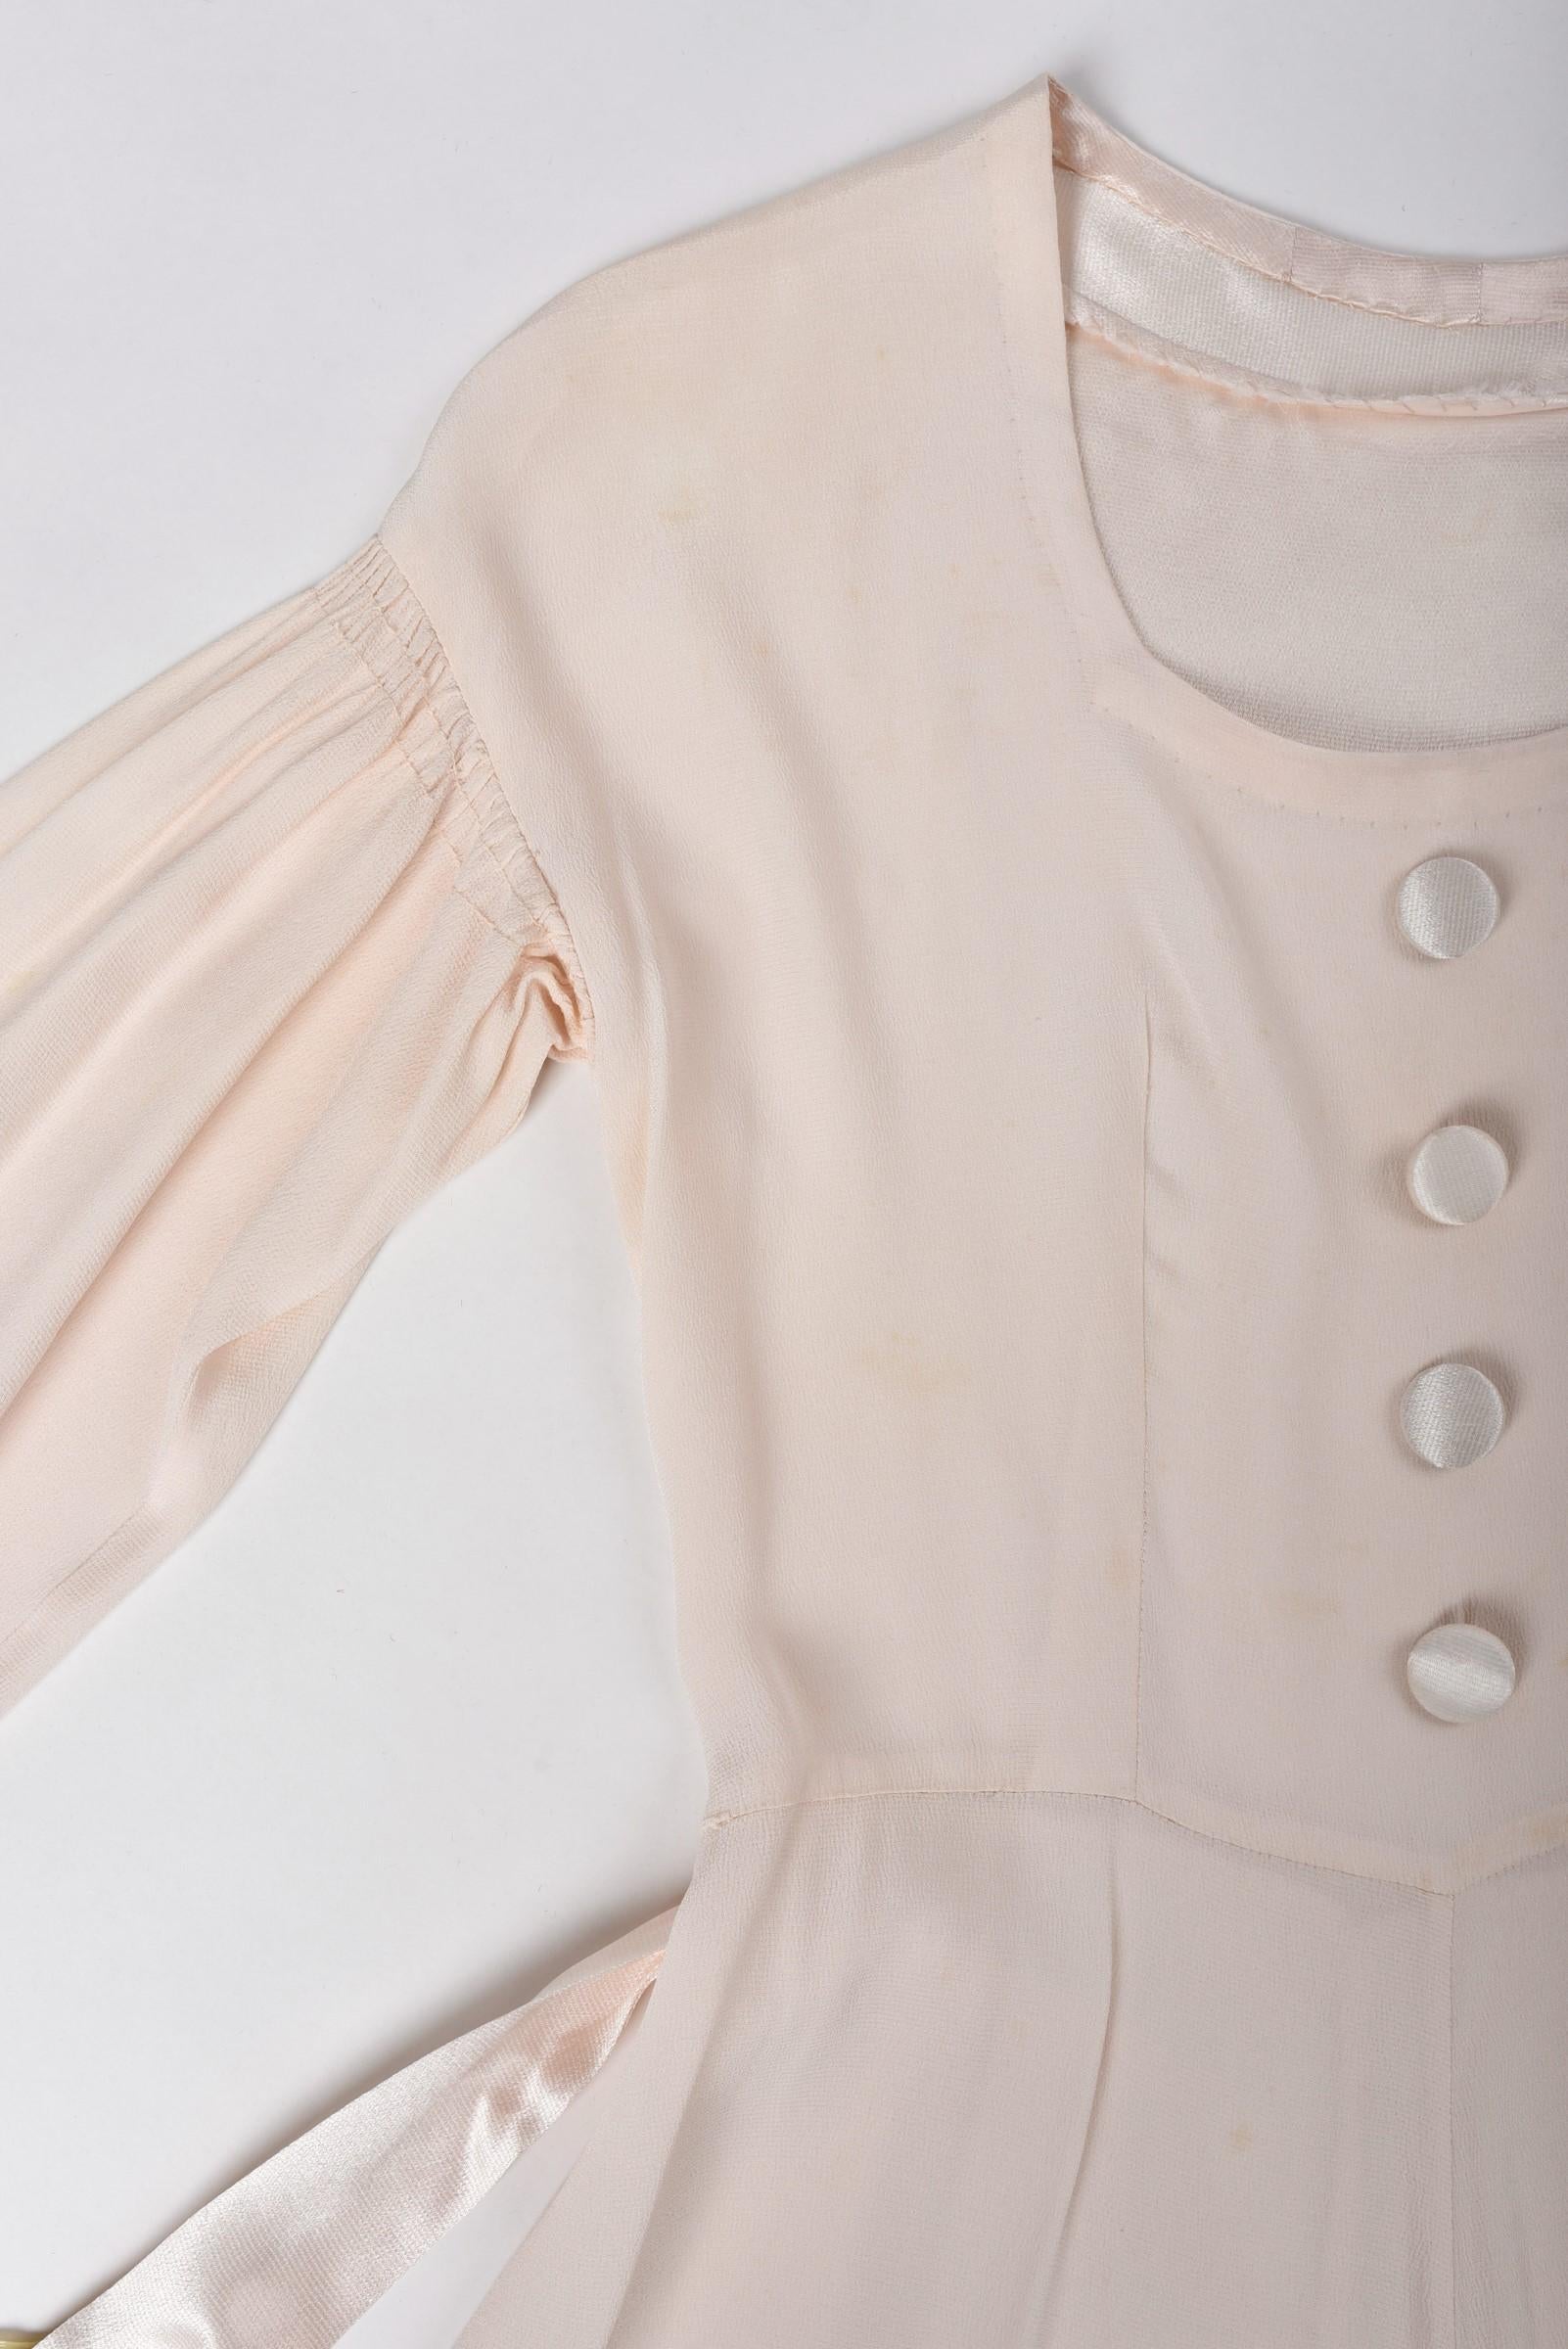 A French Powder Pink Crepe Satin Ceremonial Dress Circa 1940 For Sale 6